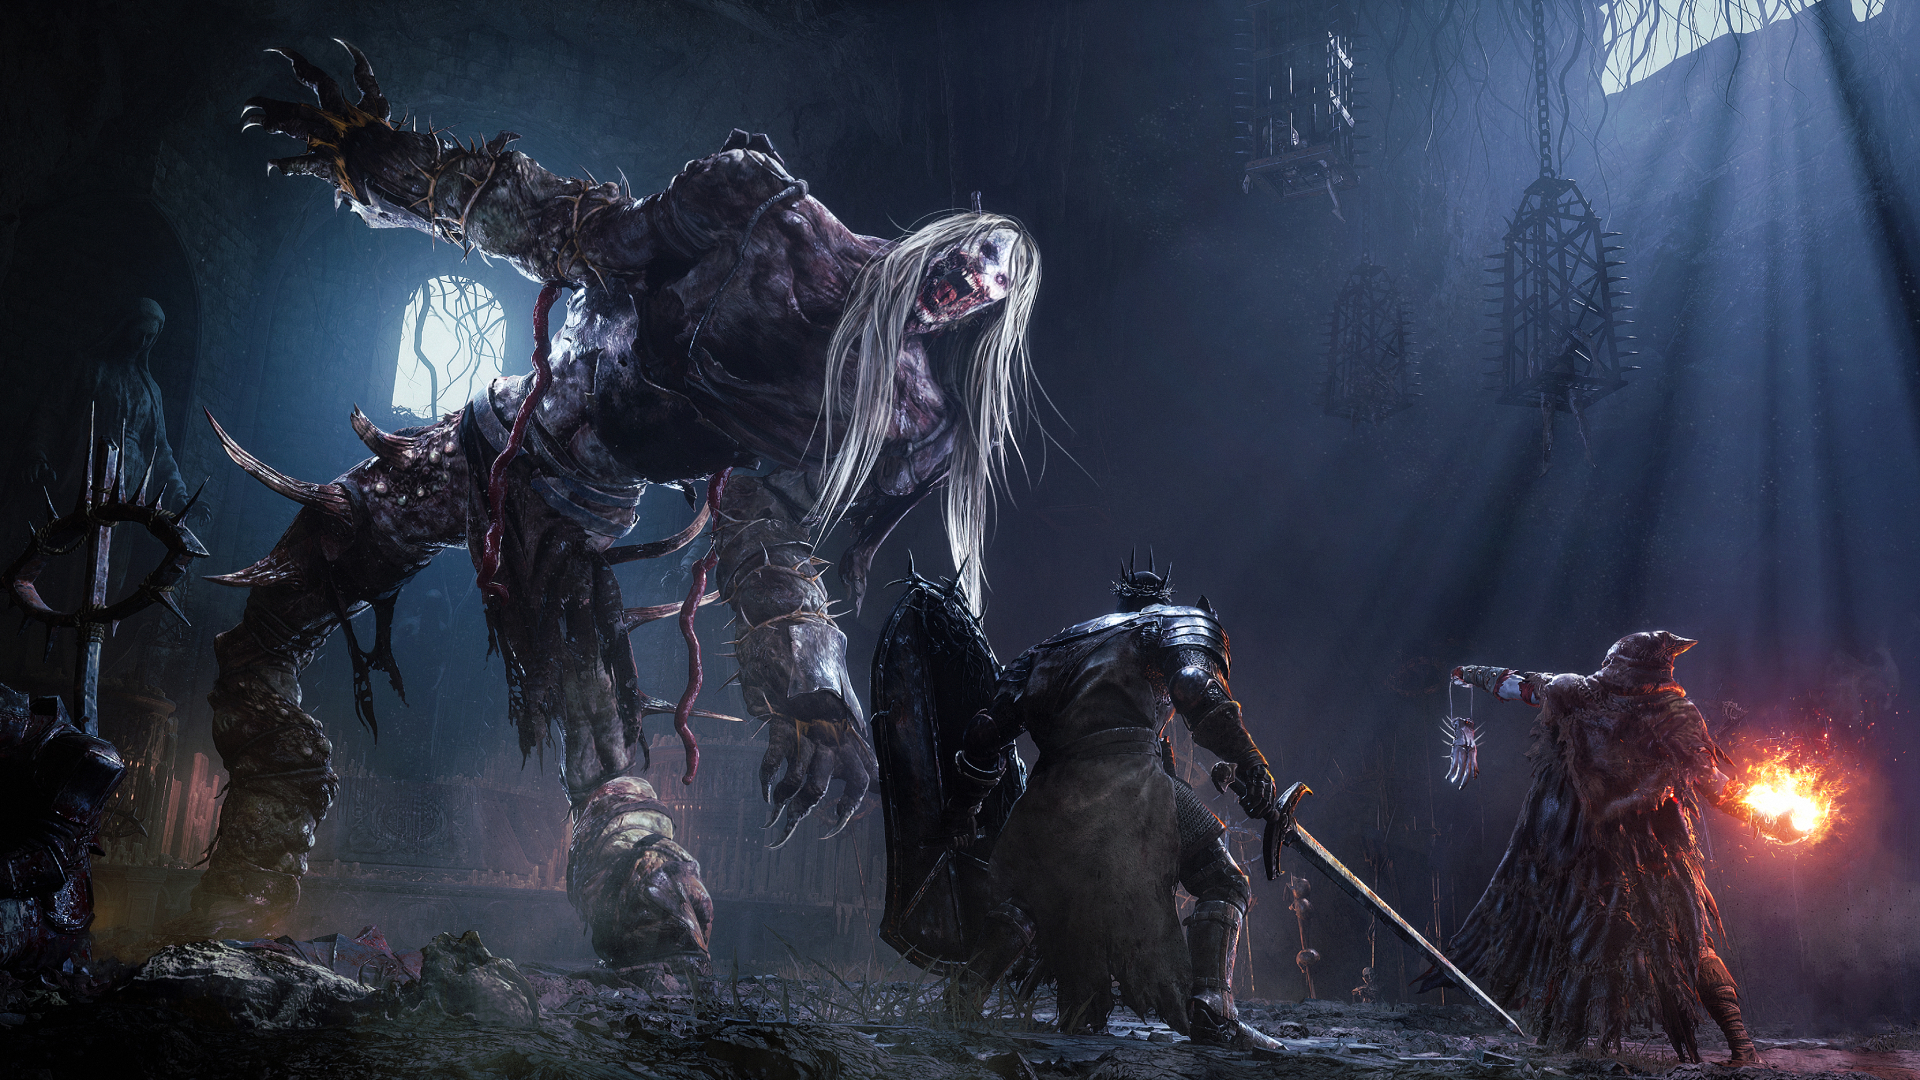 Knoebel on X: Lords of the Fallen Reviews: Eurogamer 2/5 XboxEra